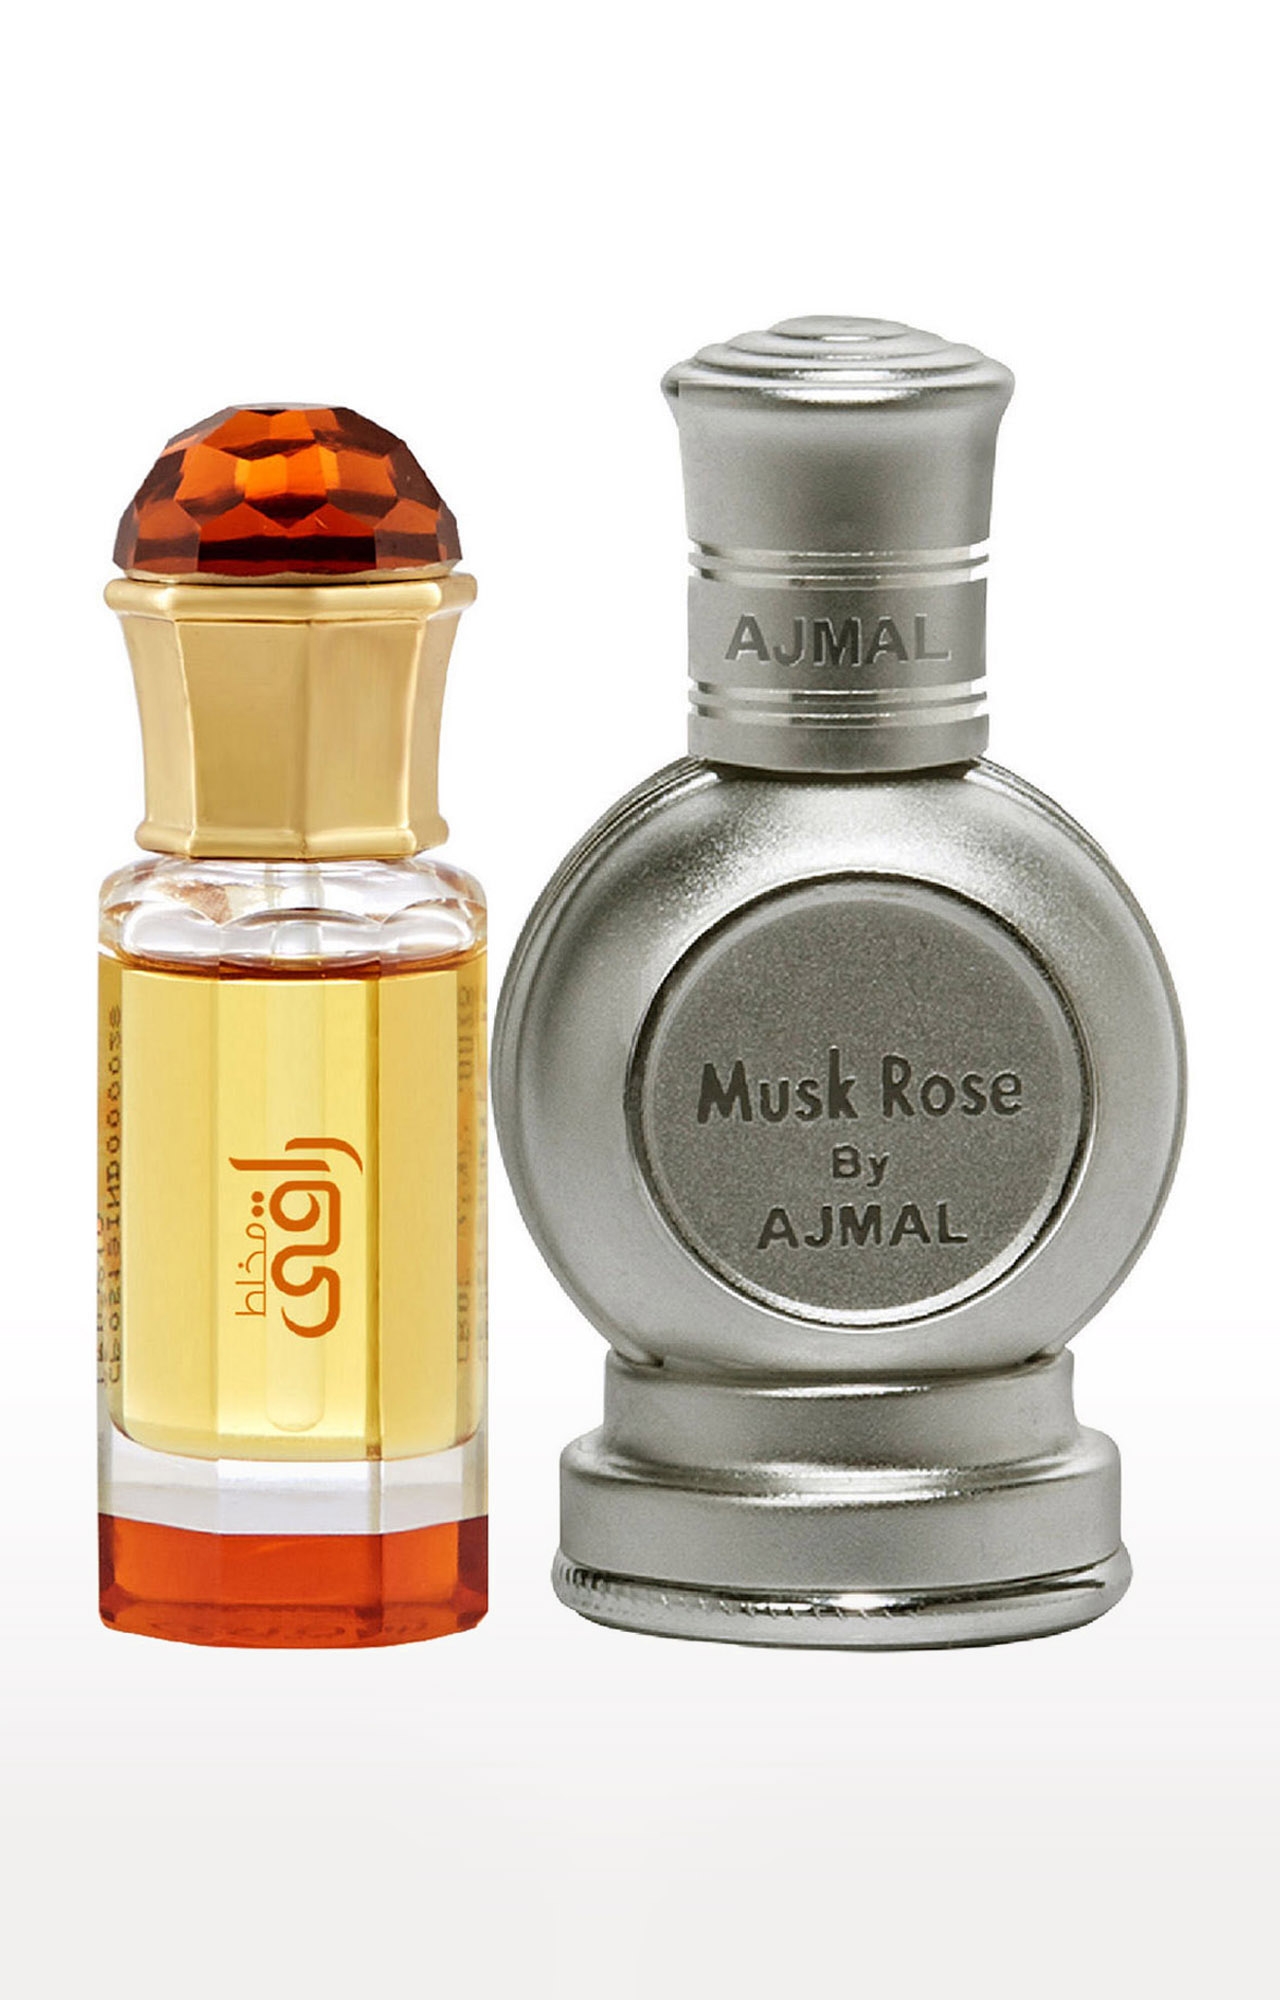 Ajmal Mukhallat Raaqi Concentrated Perfume Oil Alcohol-free Attar 10ml for Unisex and Musk Rose Concentrated Perfume Oil Musky Alcohol-free Attar 12ml for Unisex